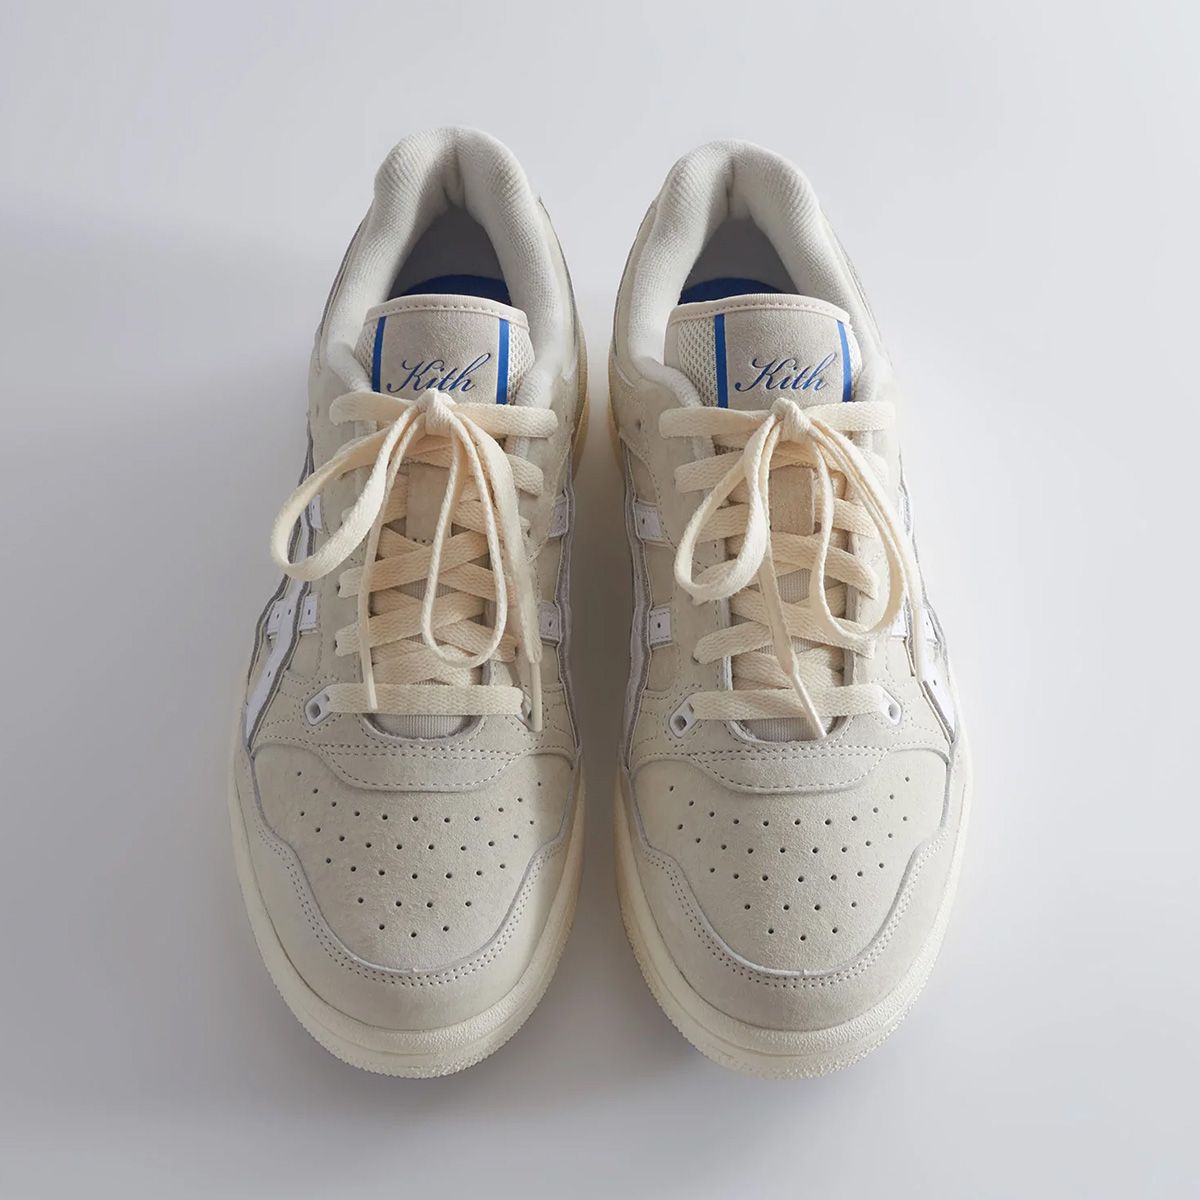 Where to Buy the Ronnie Fieg x ASICS EX89 Collection | HOUSE OF HEAT